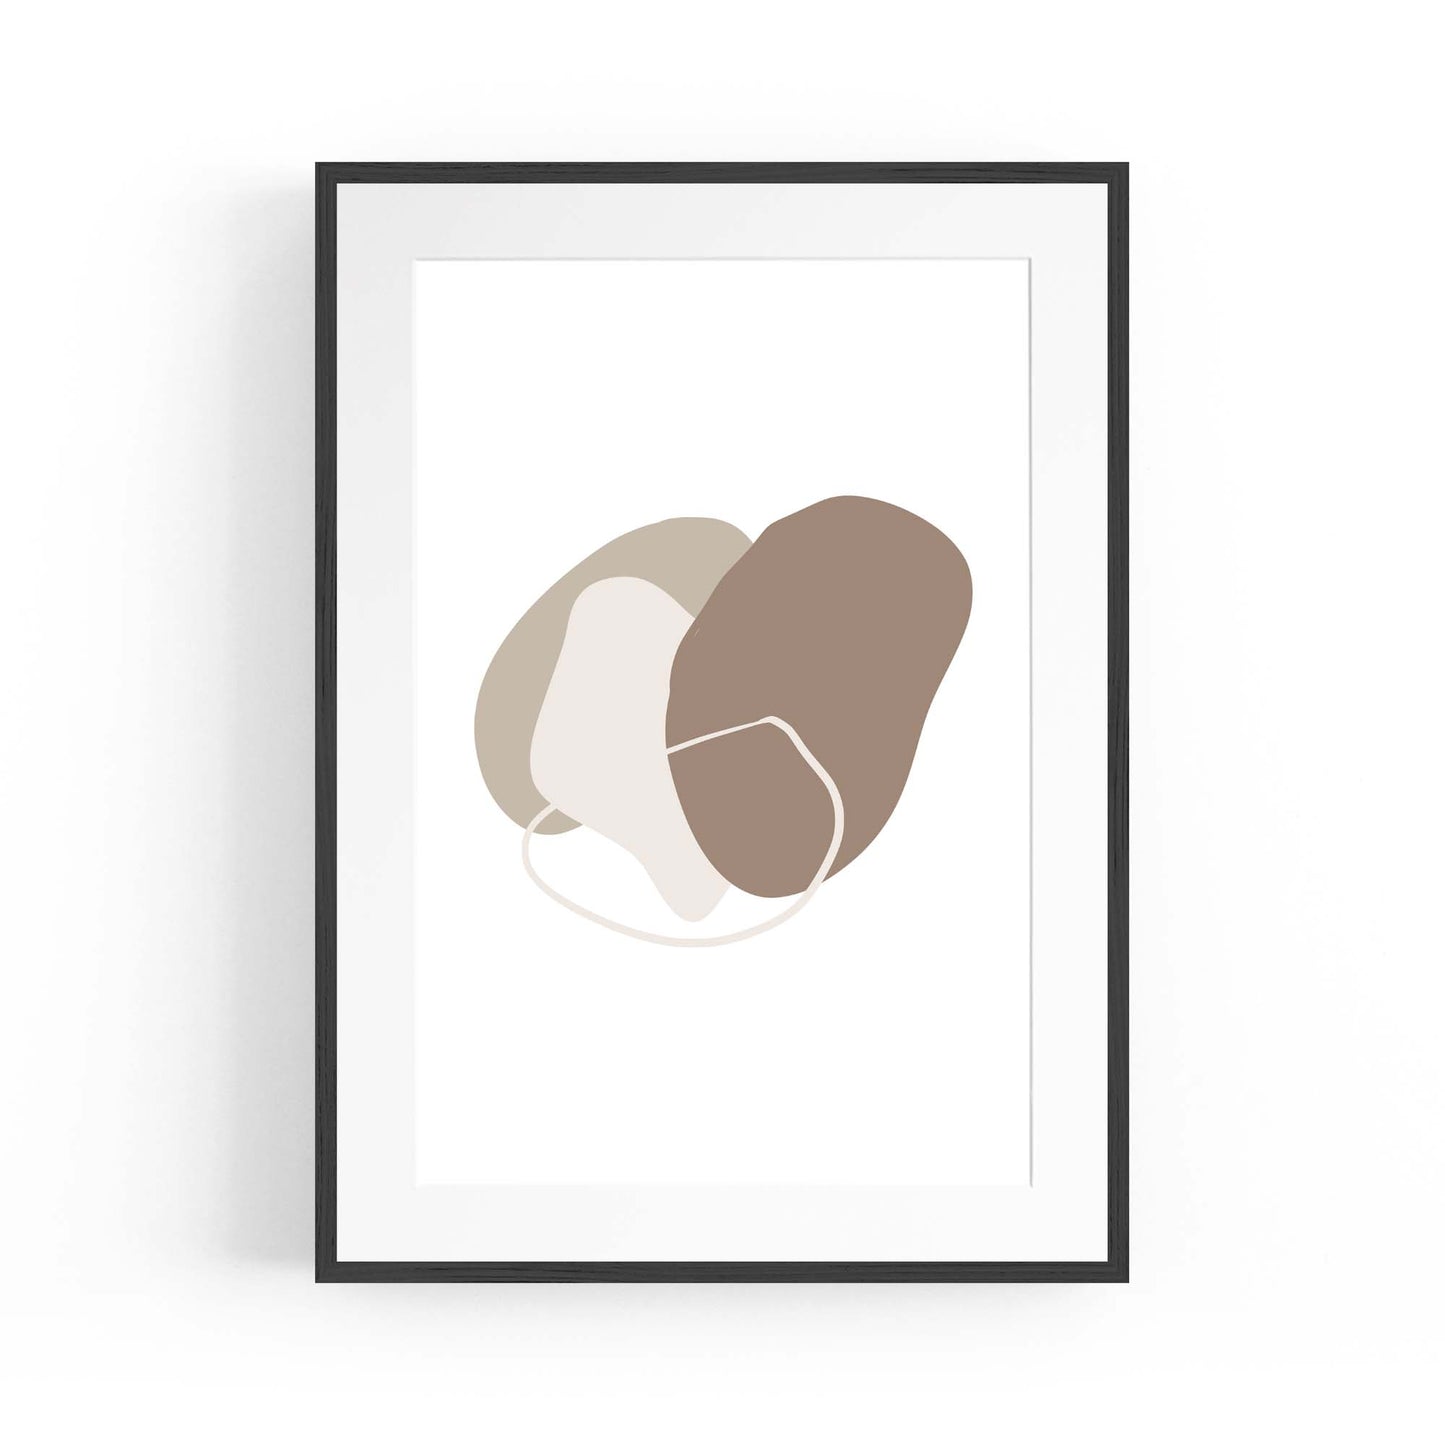 Minimal Black & White Shapes Abstract Wall Art #1 - The Affordable Art Company